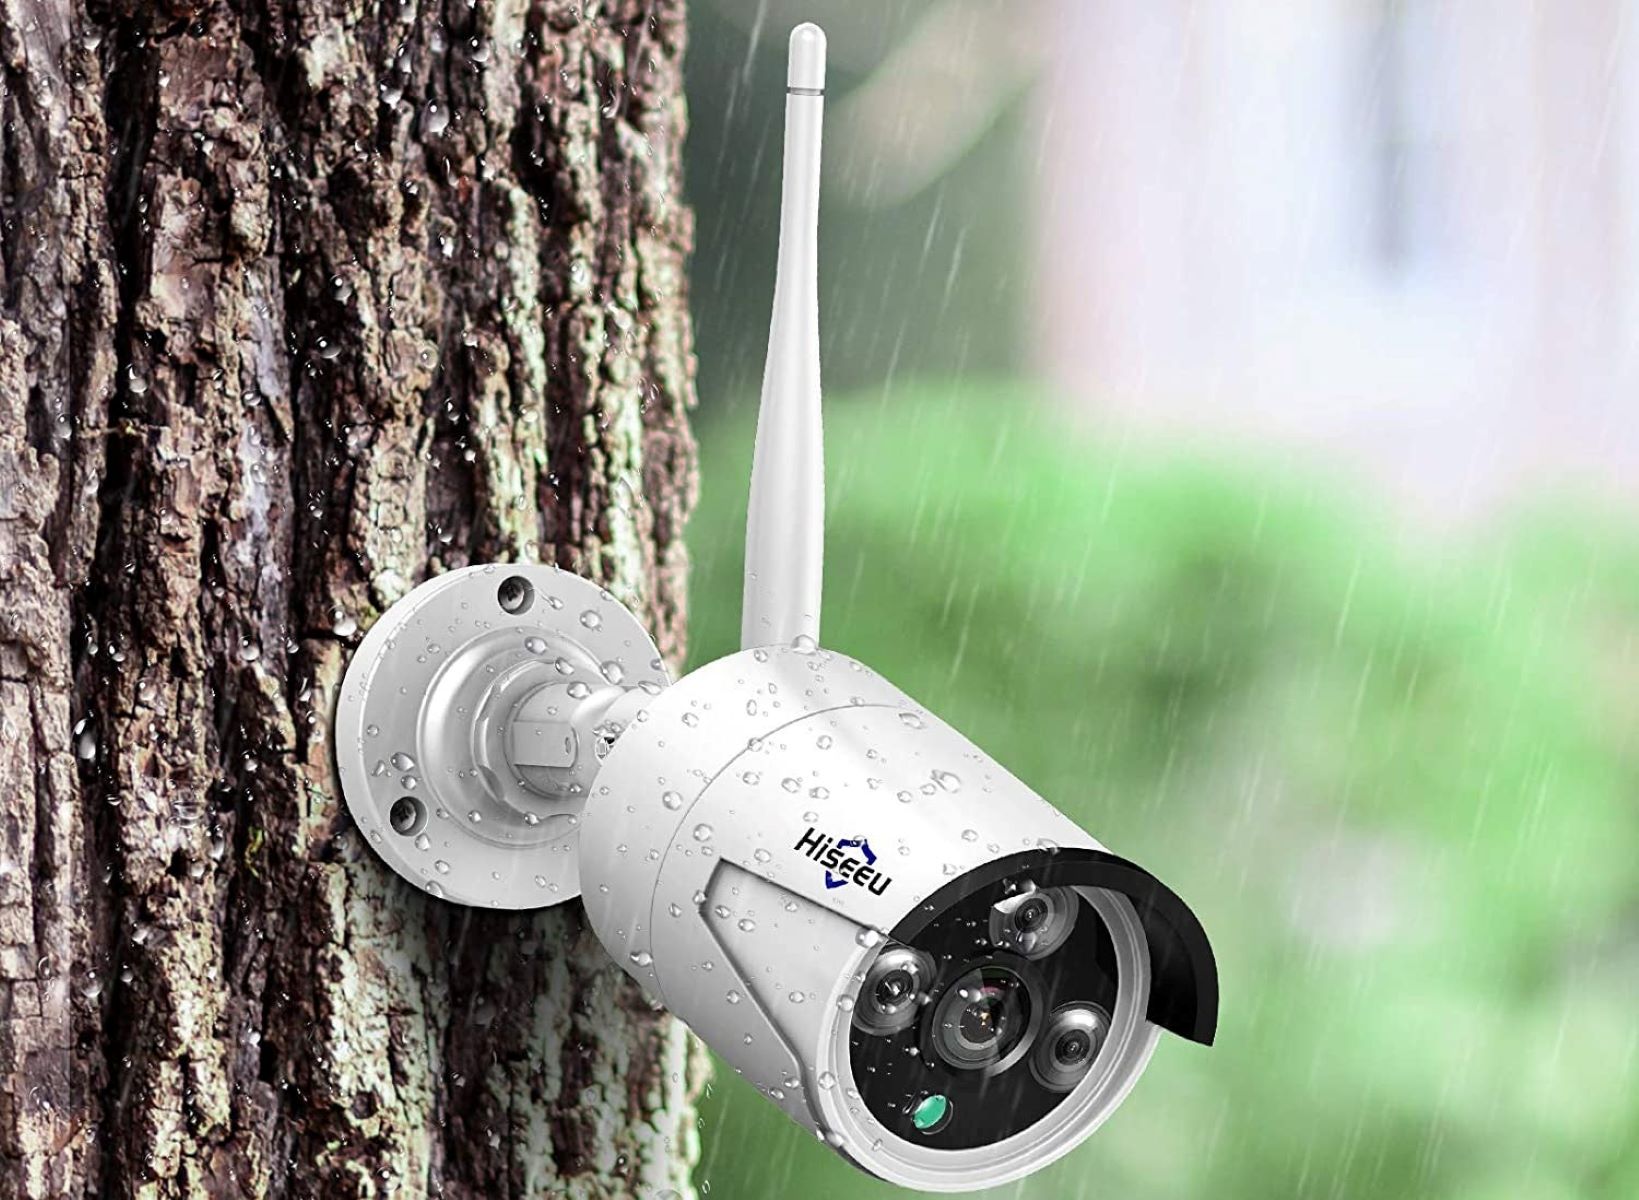 Where Do Wireless Outdoor Camera Get There Power Source